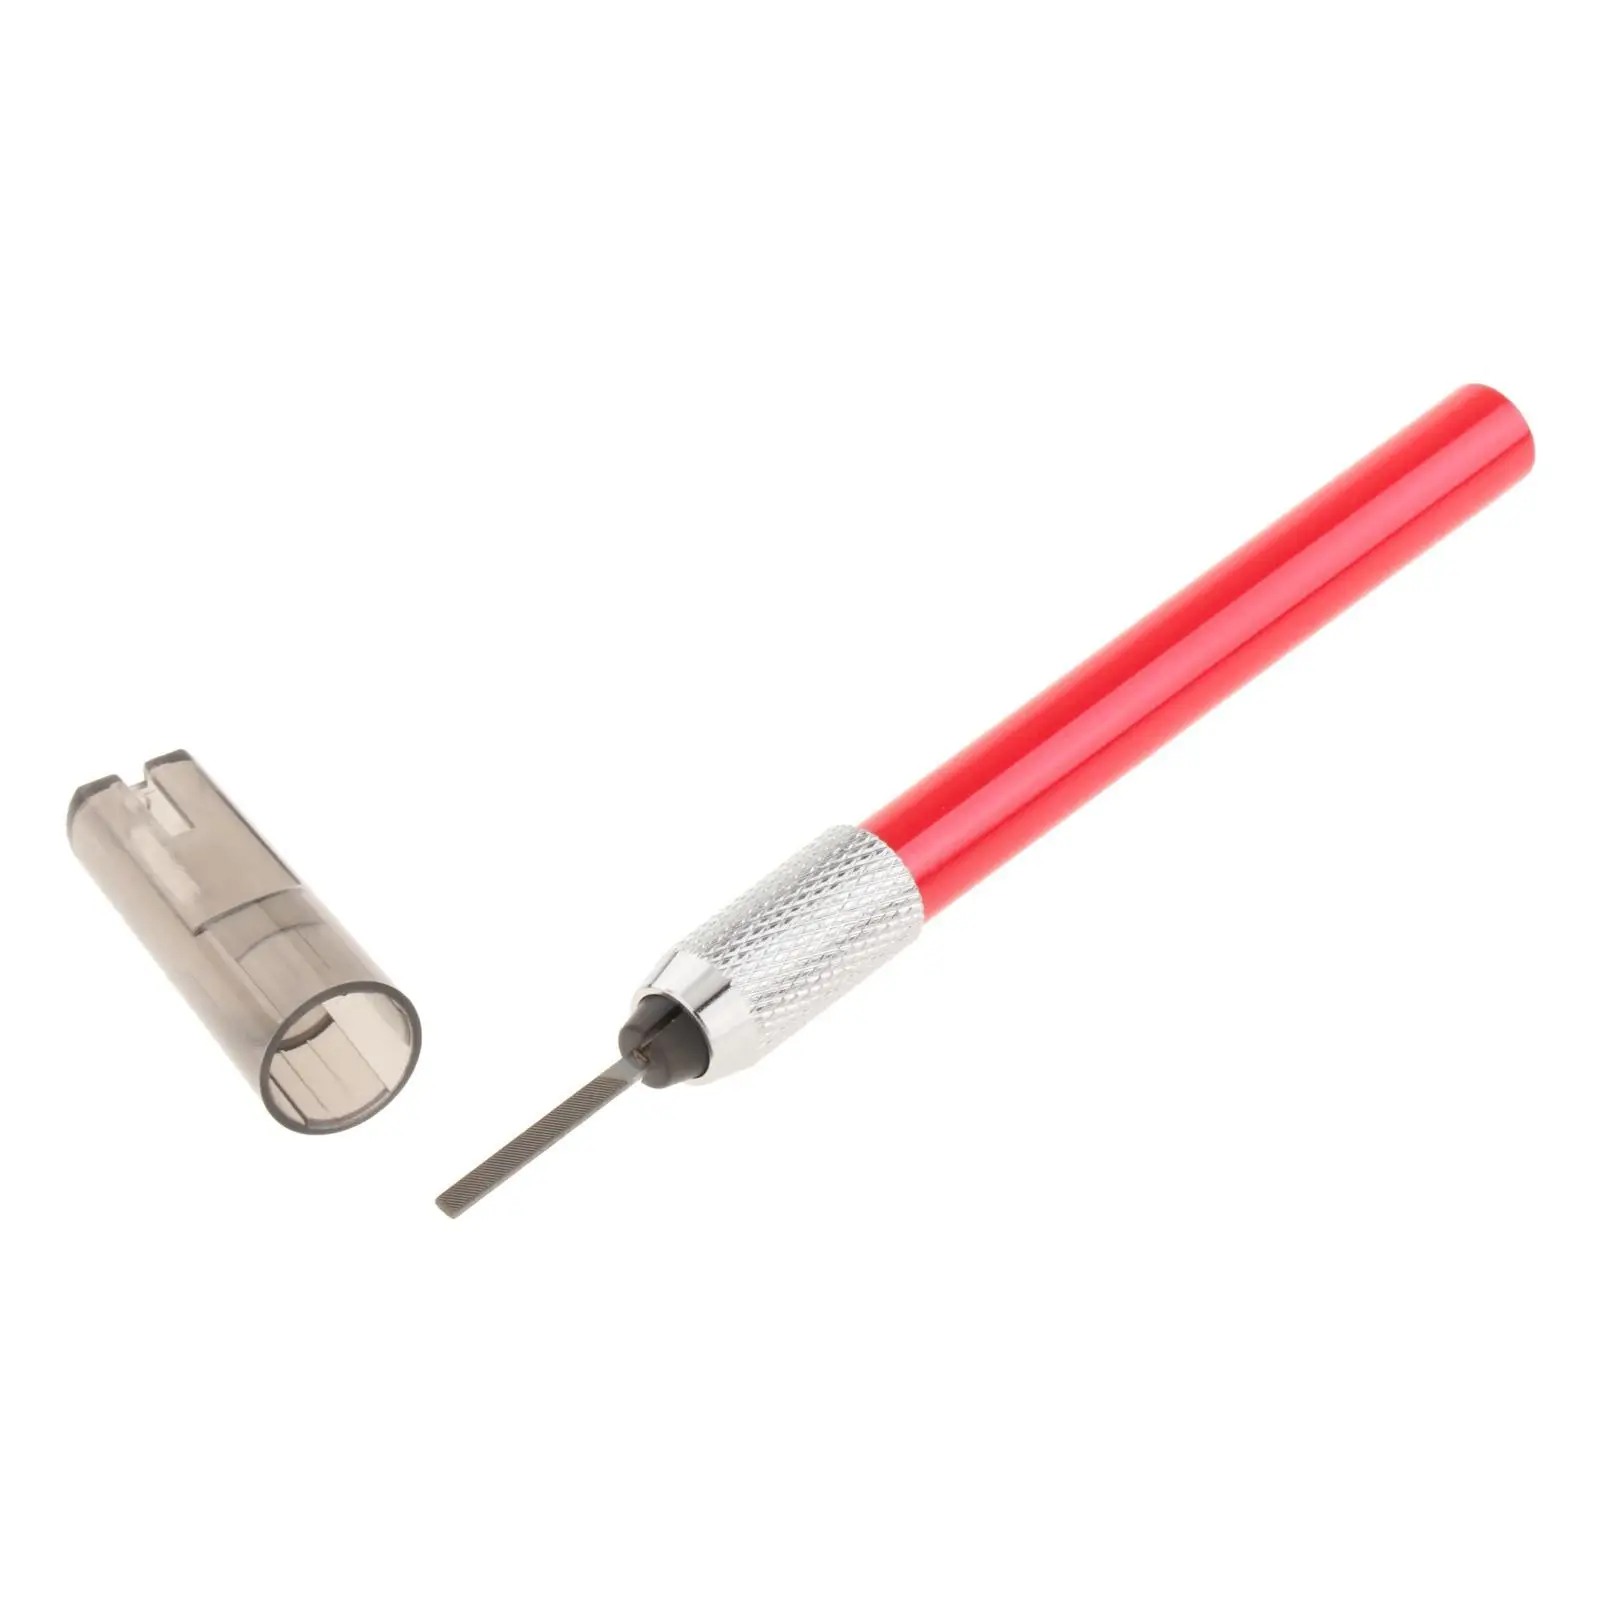 13cm Extremely Narrow File Building Modeling  Water Outlet Grinding Hobby Polishing Tool Metal File for Parts